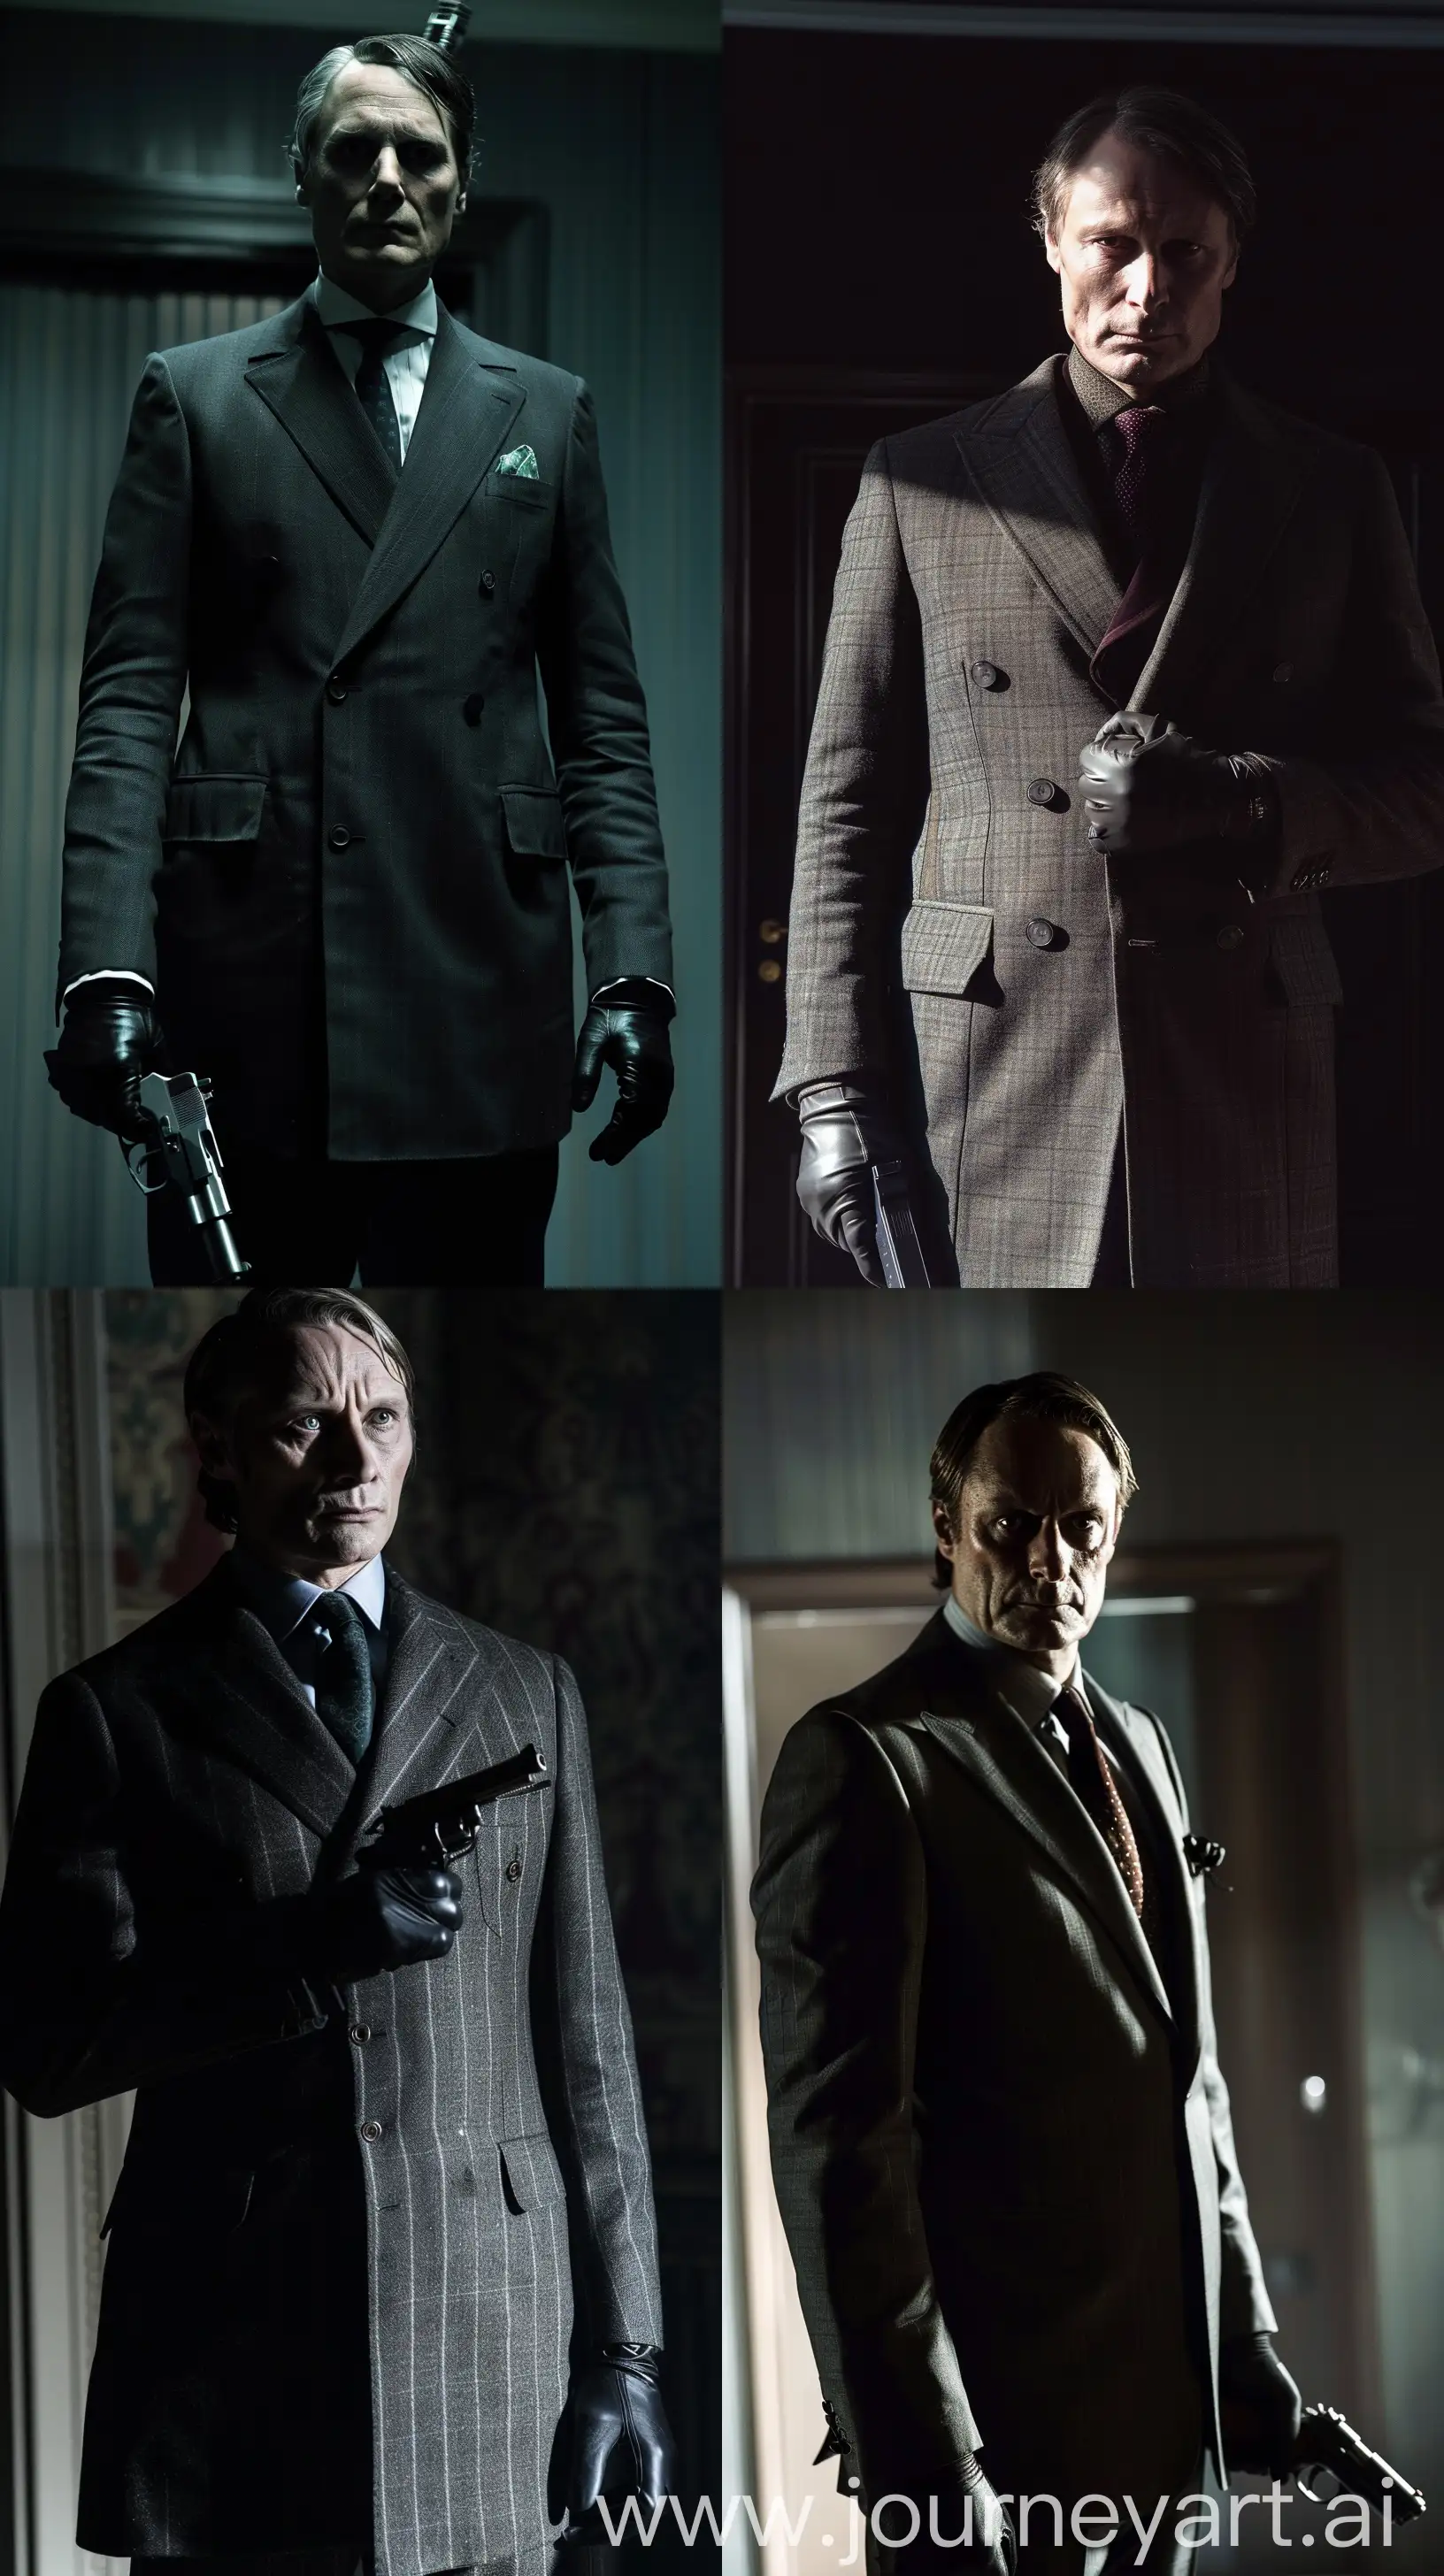 Sophisticated-and-Dangerous-Hannibal-Lecter-in-Dimly-Lit-Room